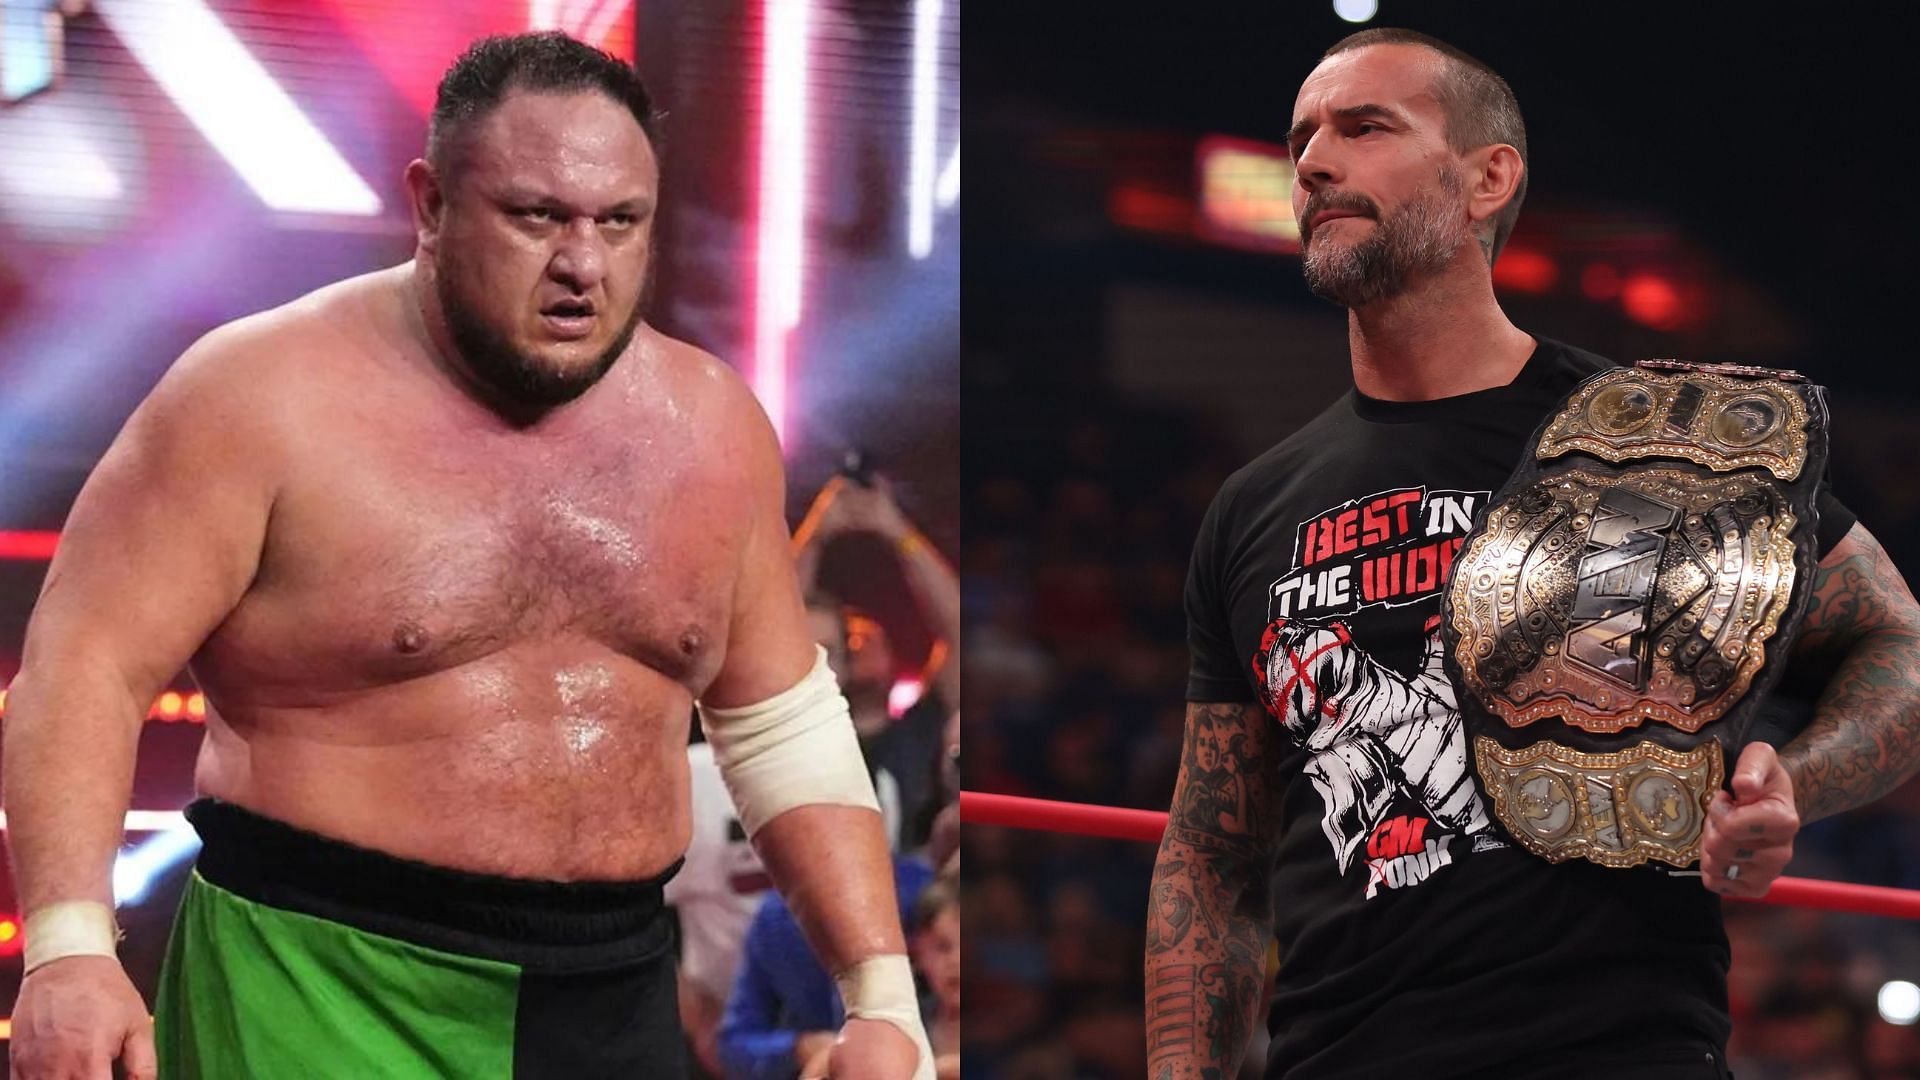 Samoa Joe was not able to take down CM Punk at All In